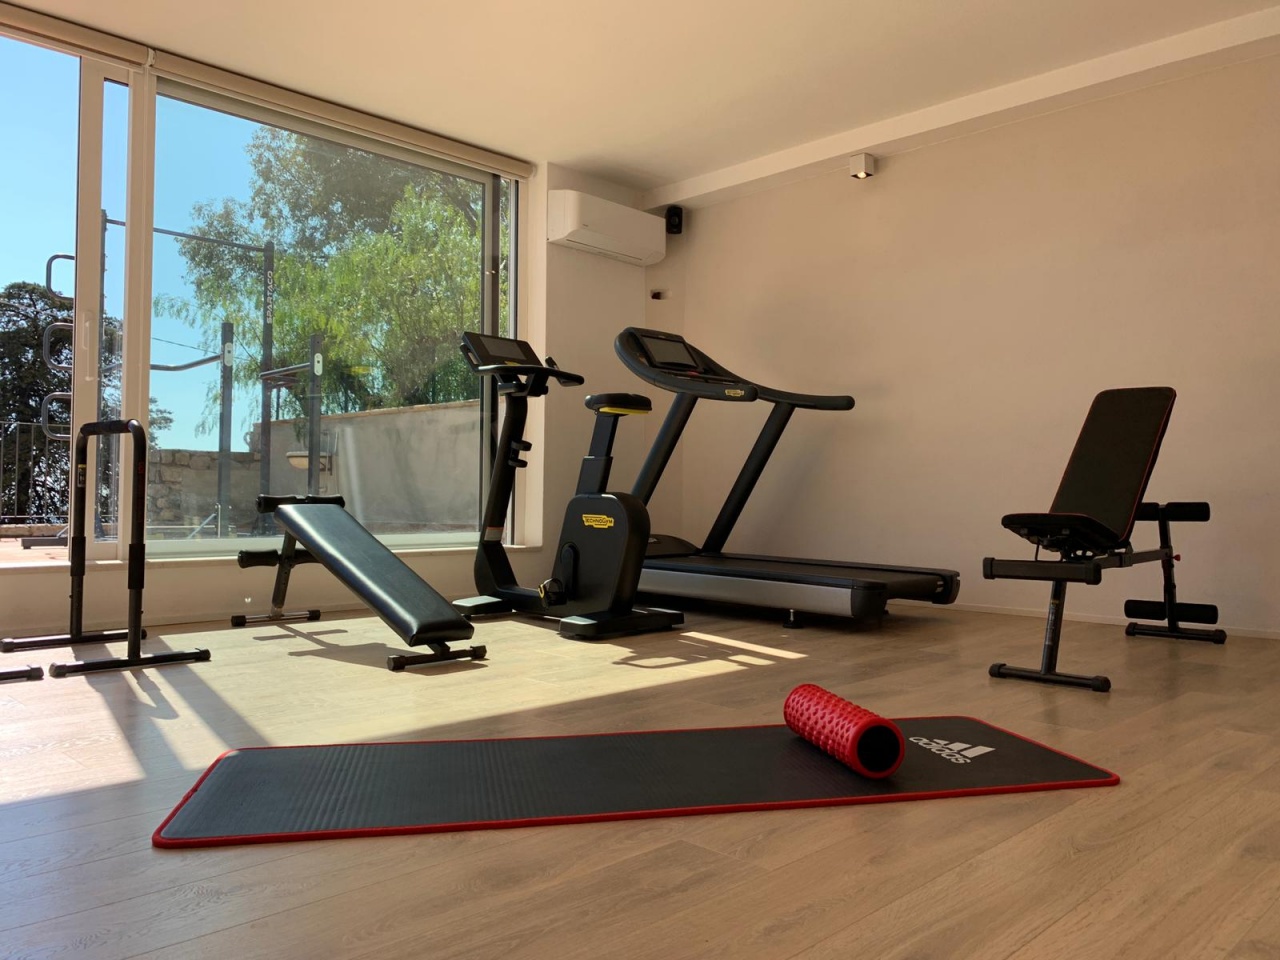 Gym | Hotel Taormina | Holidays in Sicily | Hotel 4 Star | Boutique Hotel Taormina is centrally